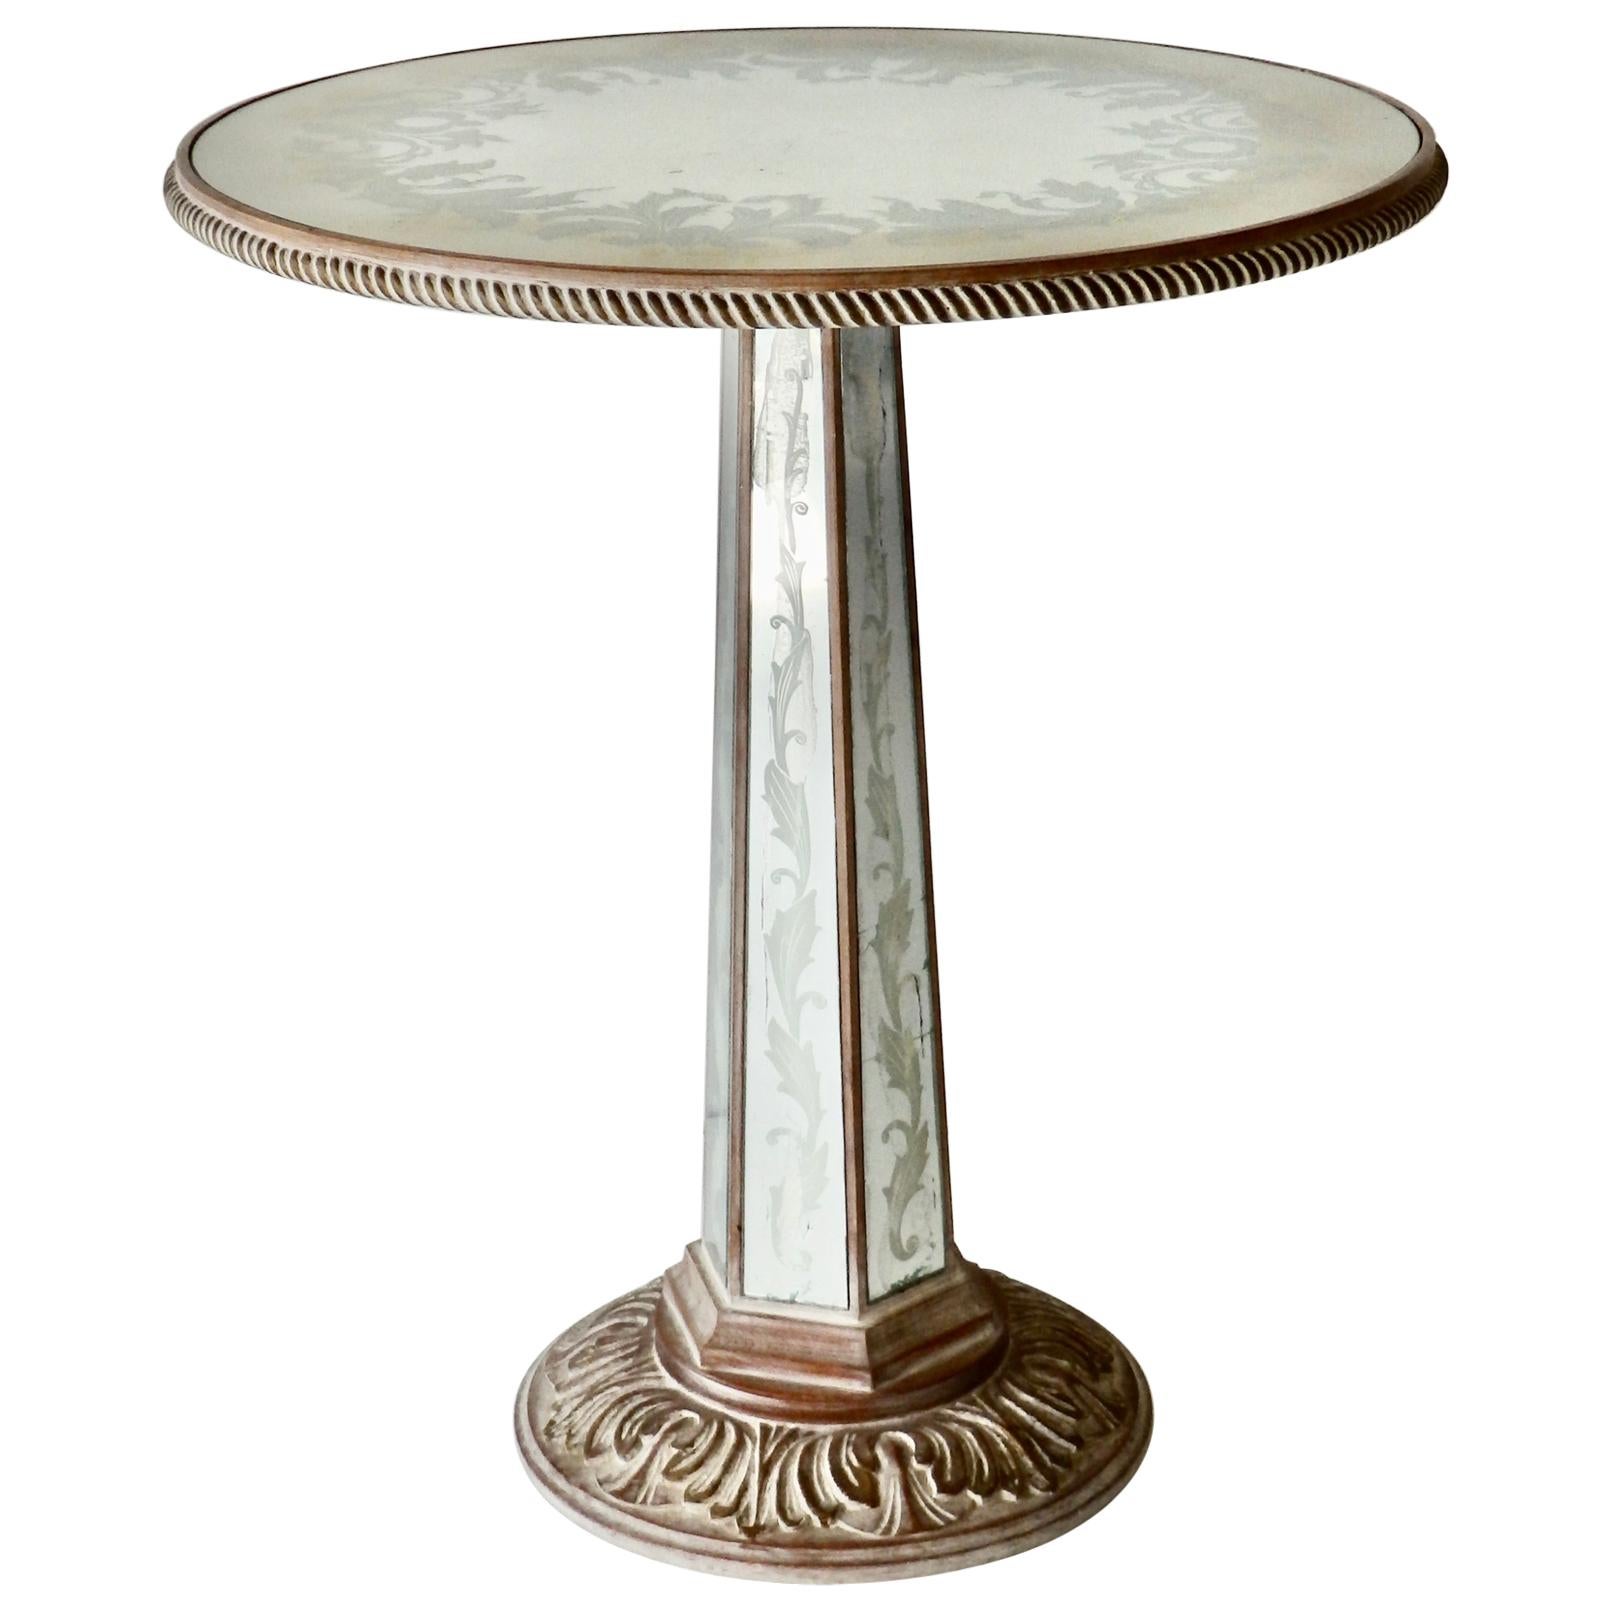 Hollywood Regency Silver Leafed Glass Top Table Attributed to Grosfeld House